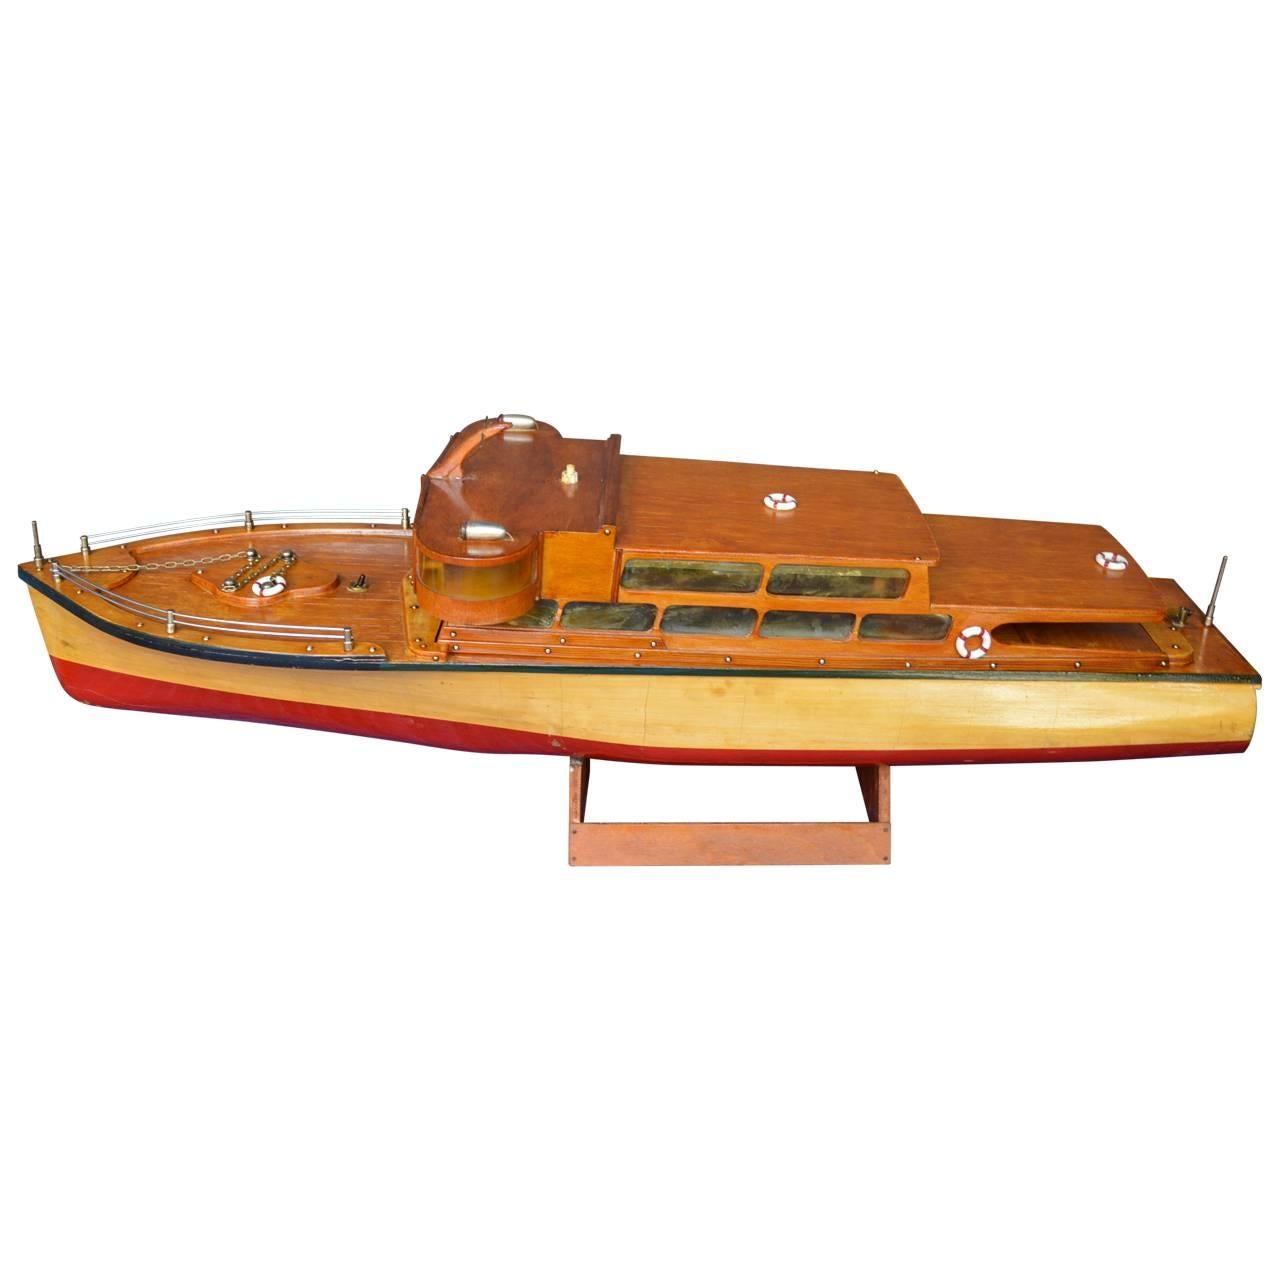 American Vintage and Motorized Yacht Model